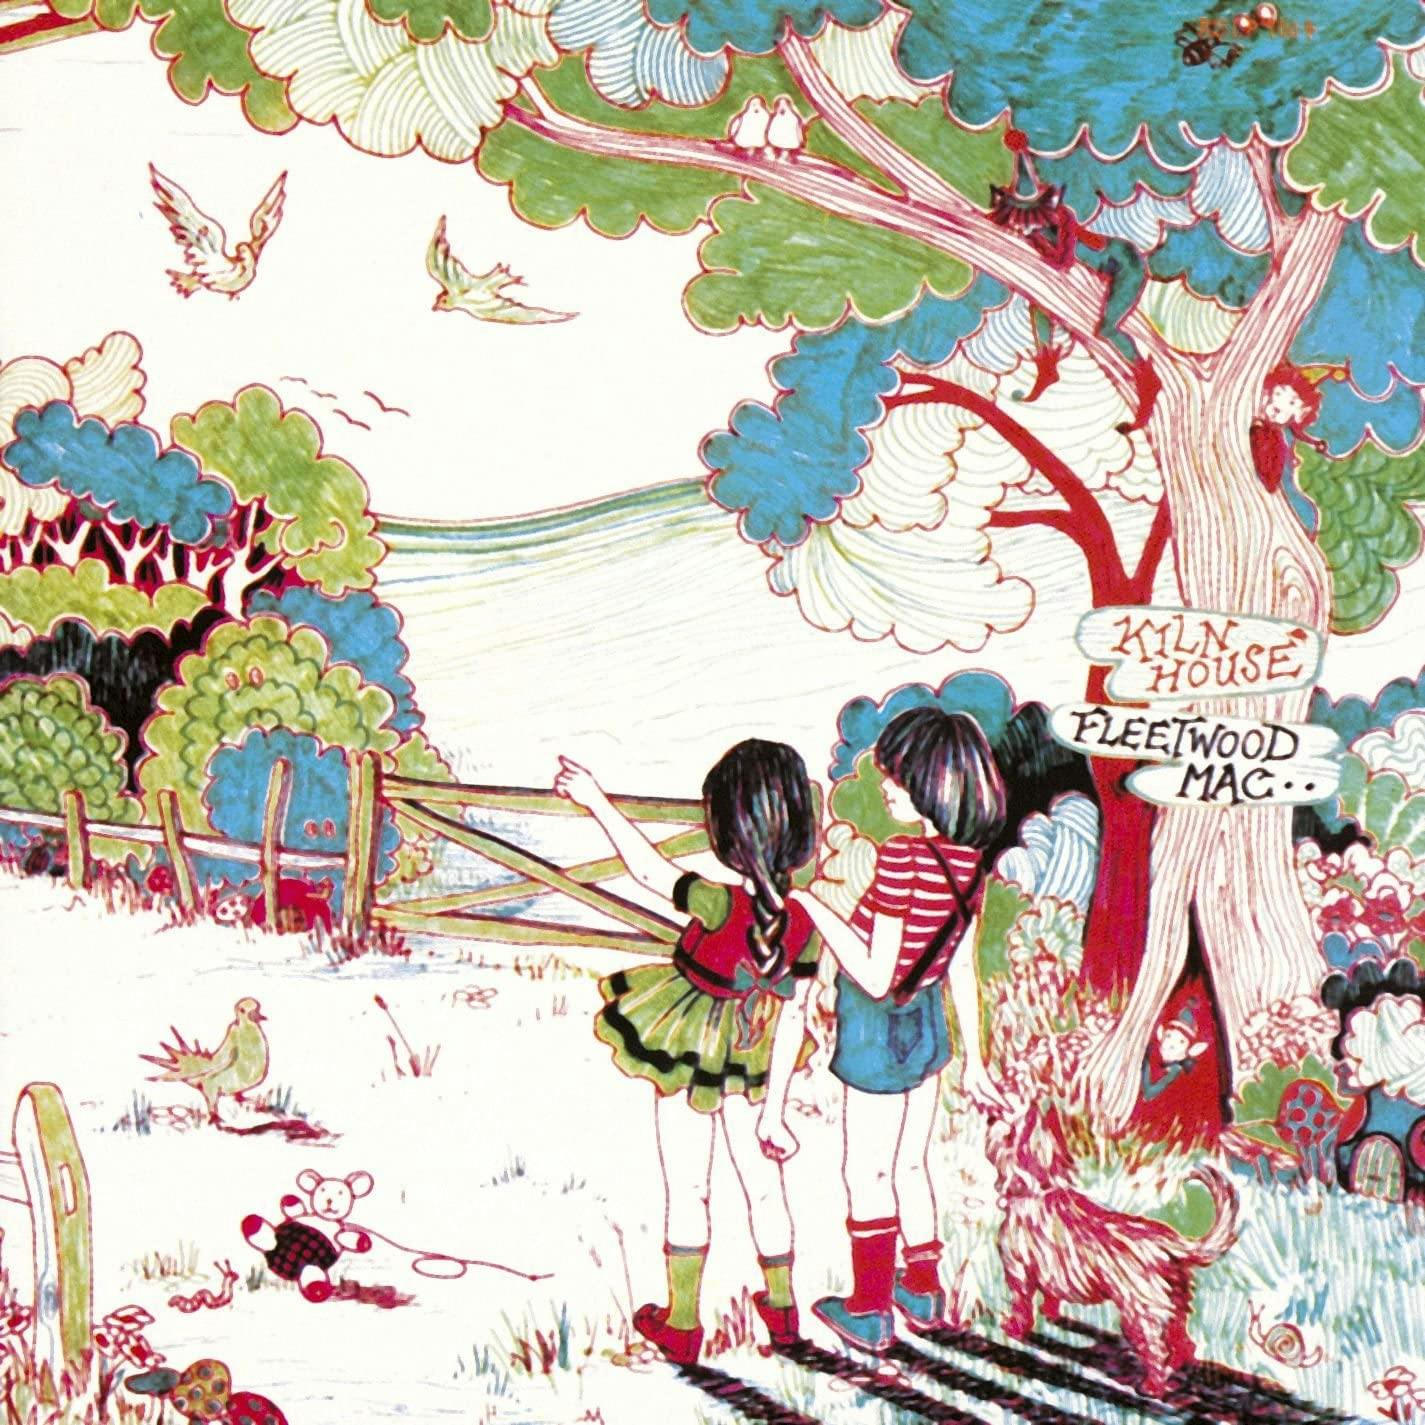 4. DAY BY DAY: FLEETWOOD MAC - KILN HOUSE